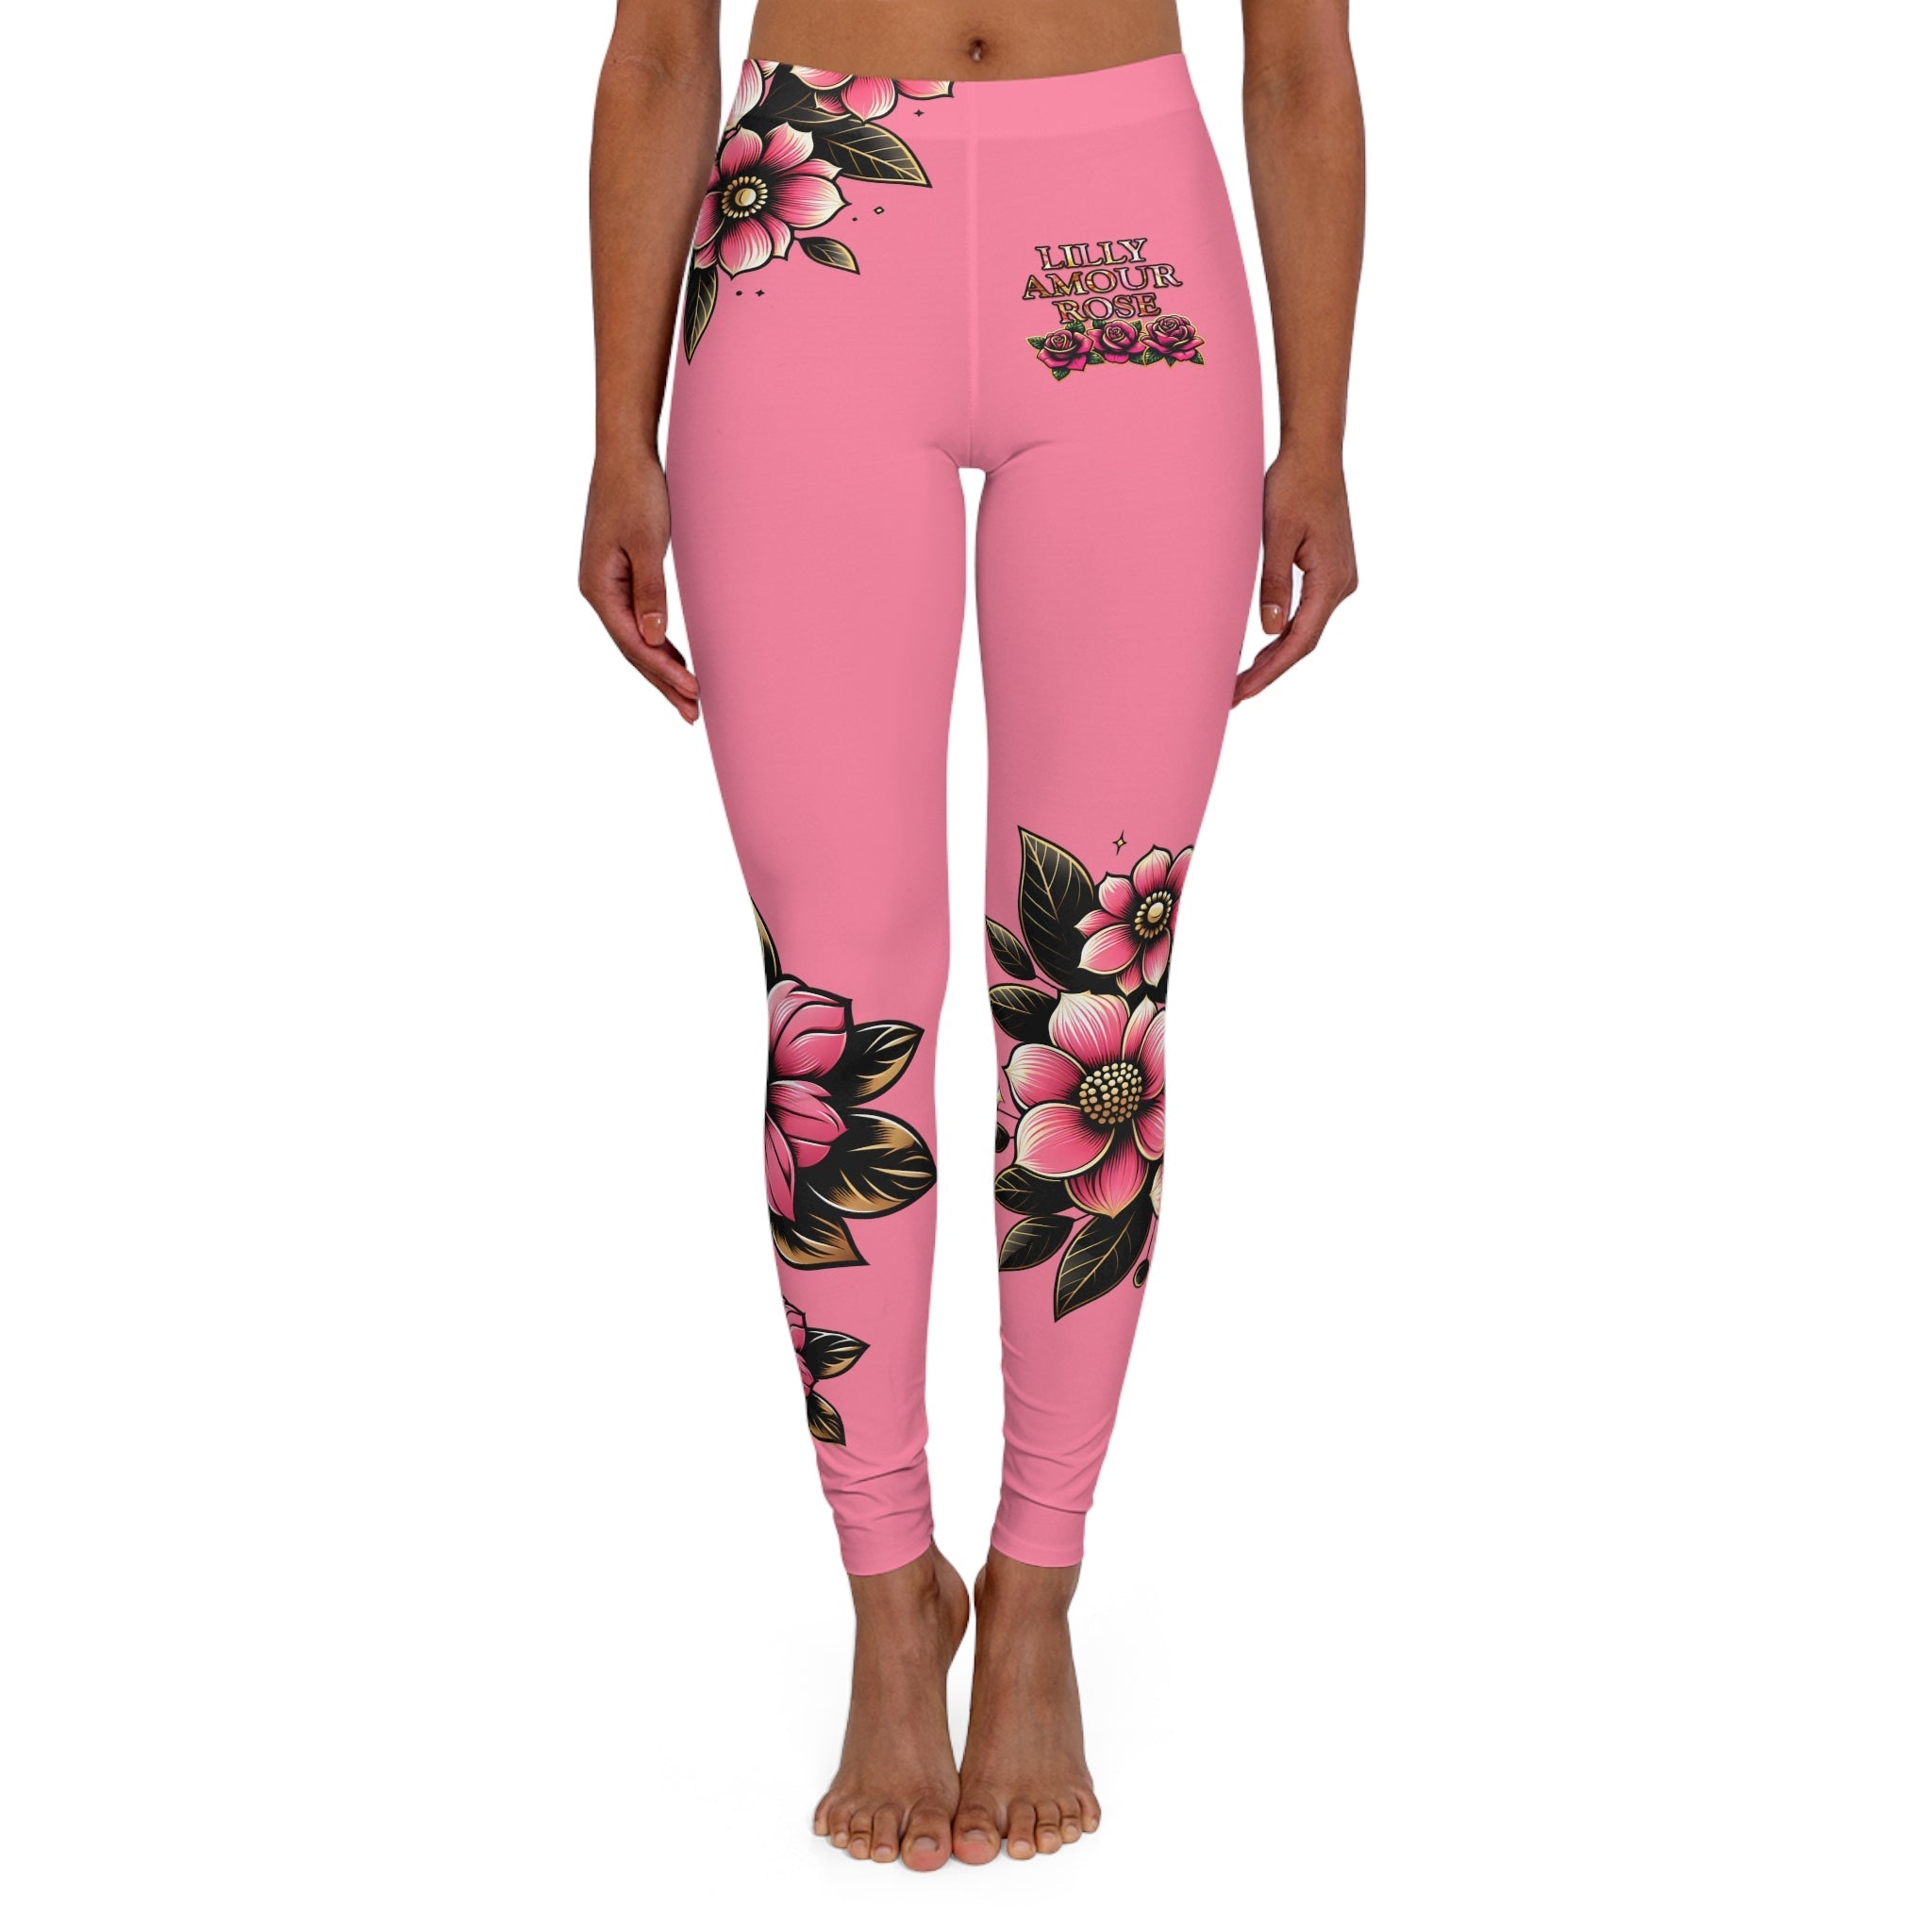 Lilly Amour Rose - Women's Spandex Leggings Pink